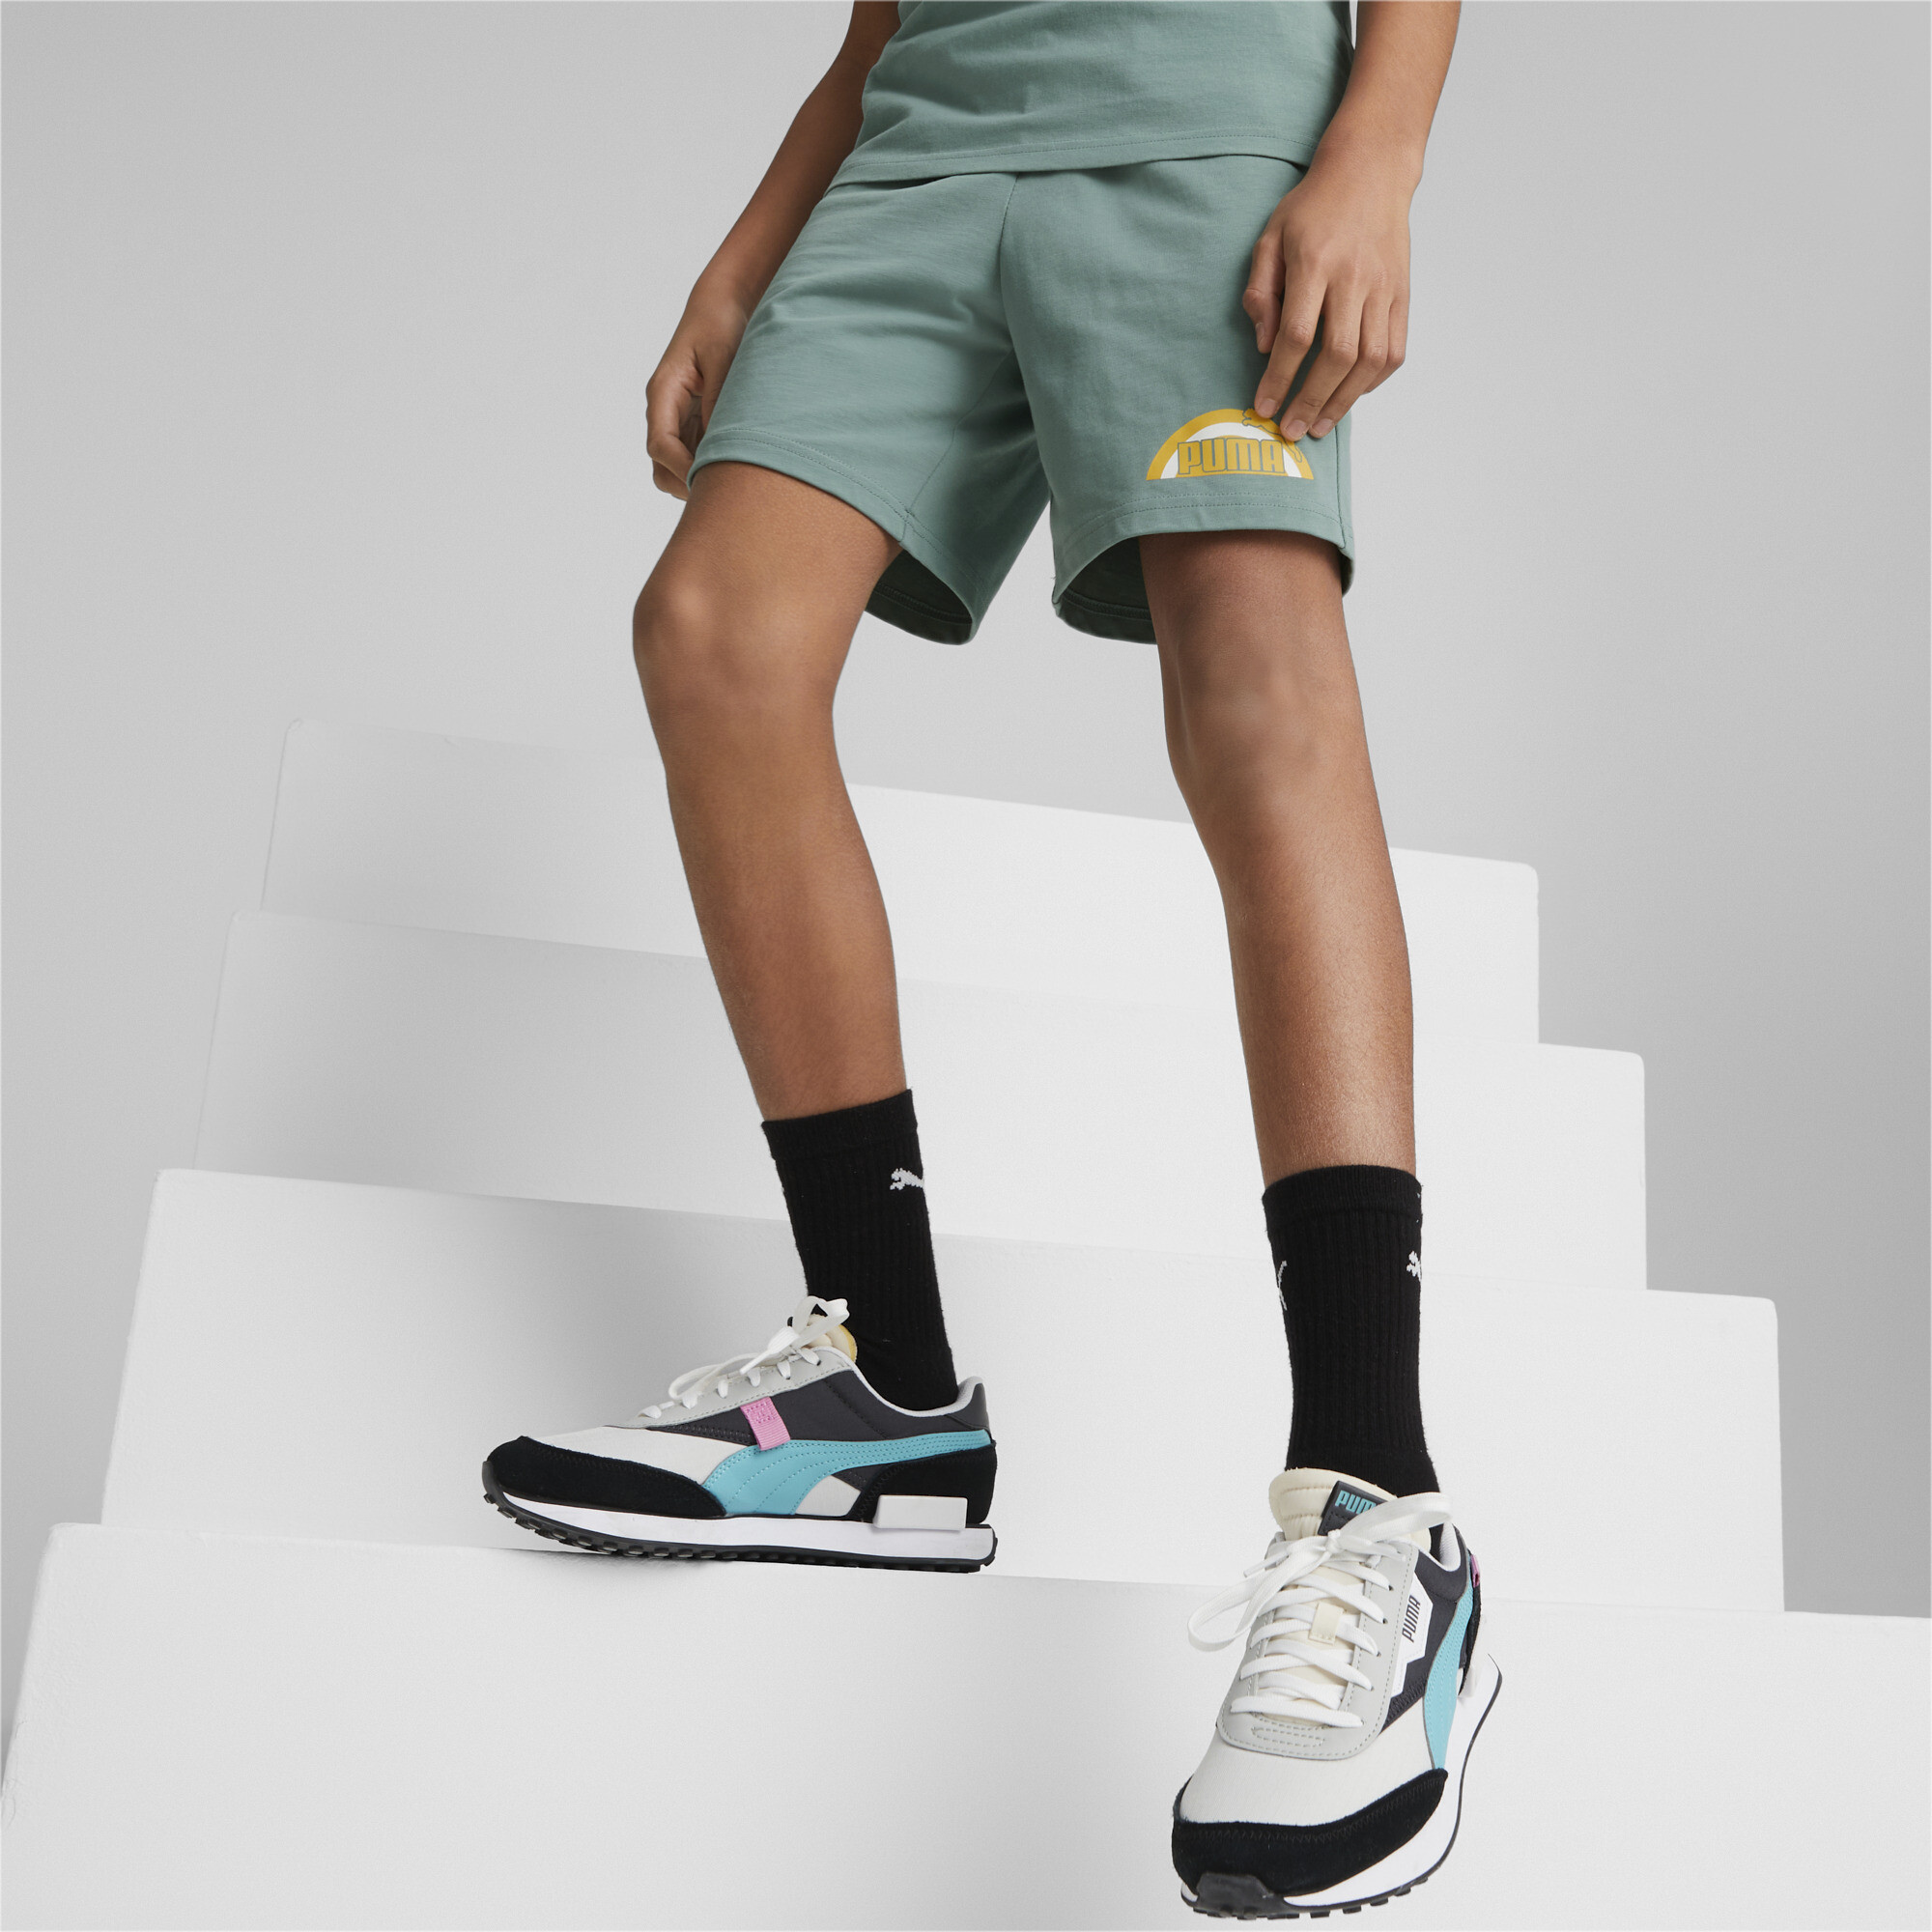 PUMA Essentials+ Street Art Shorts In Gray, Size 11-12 Youth